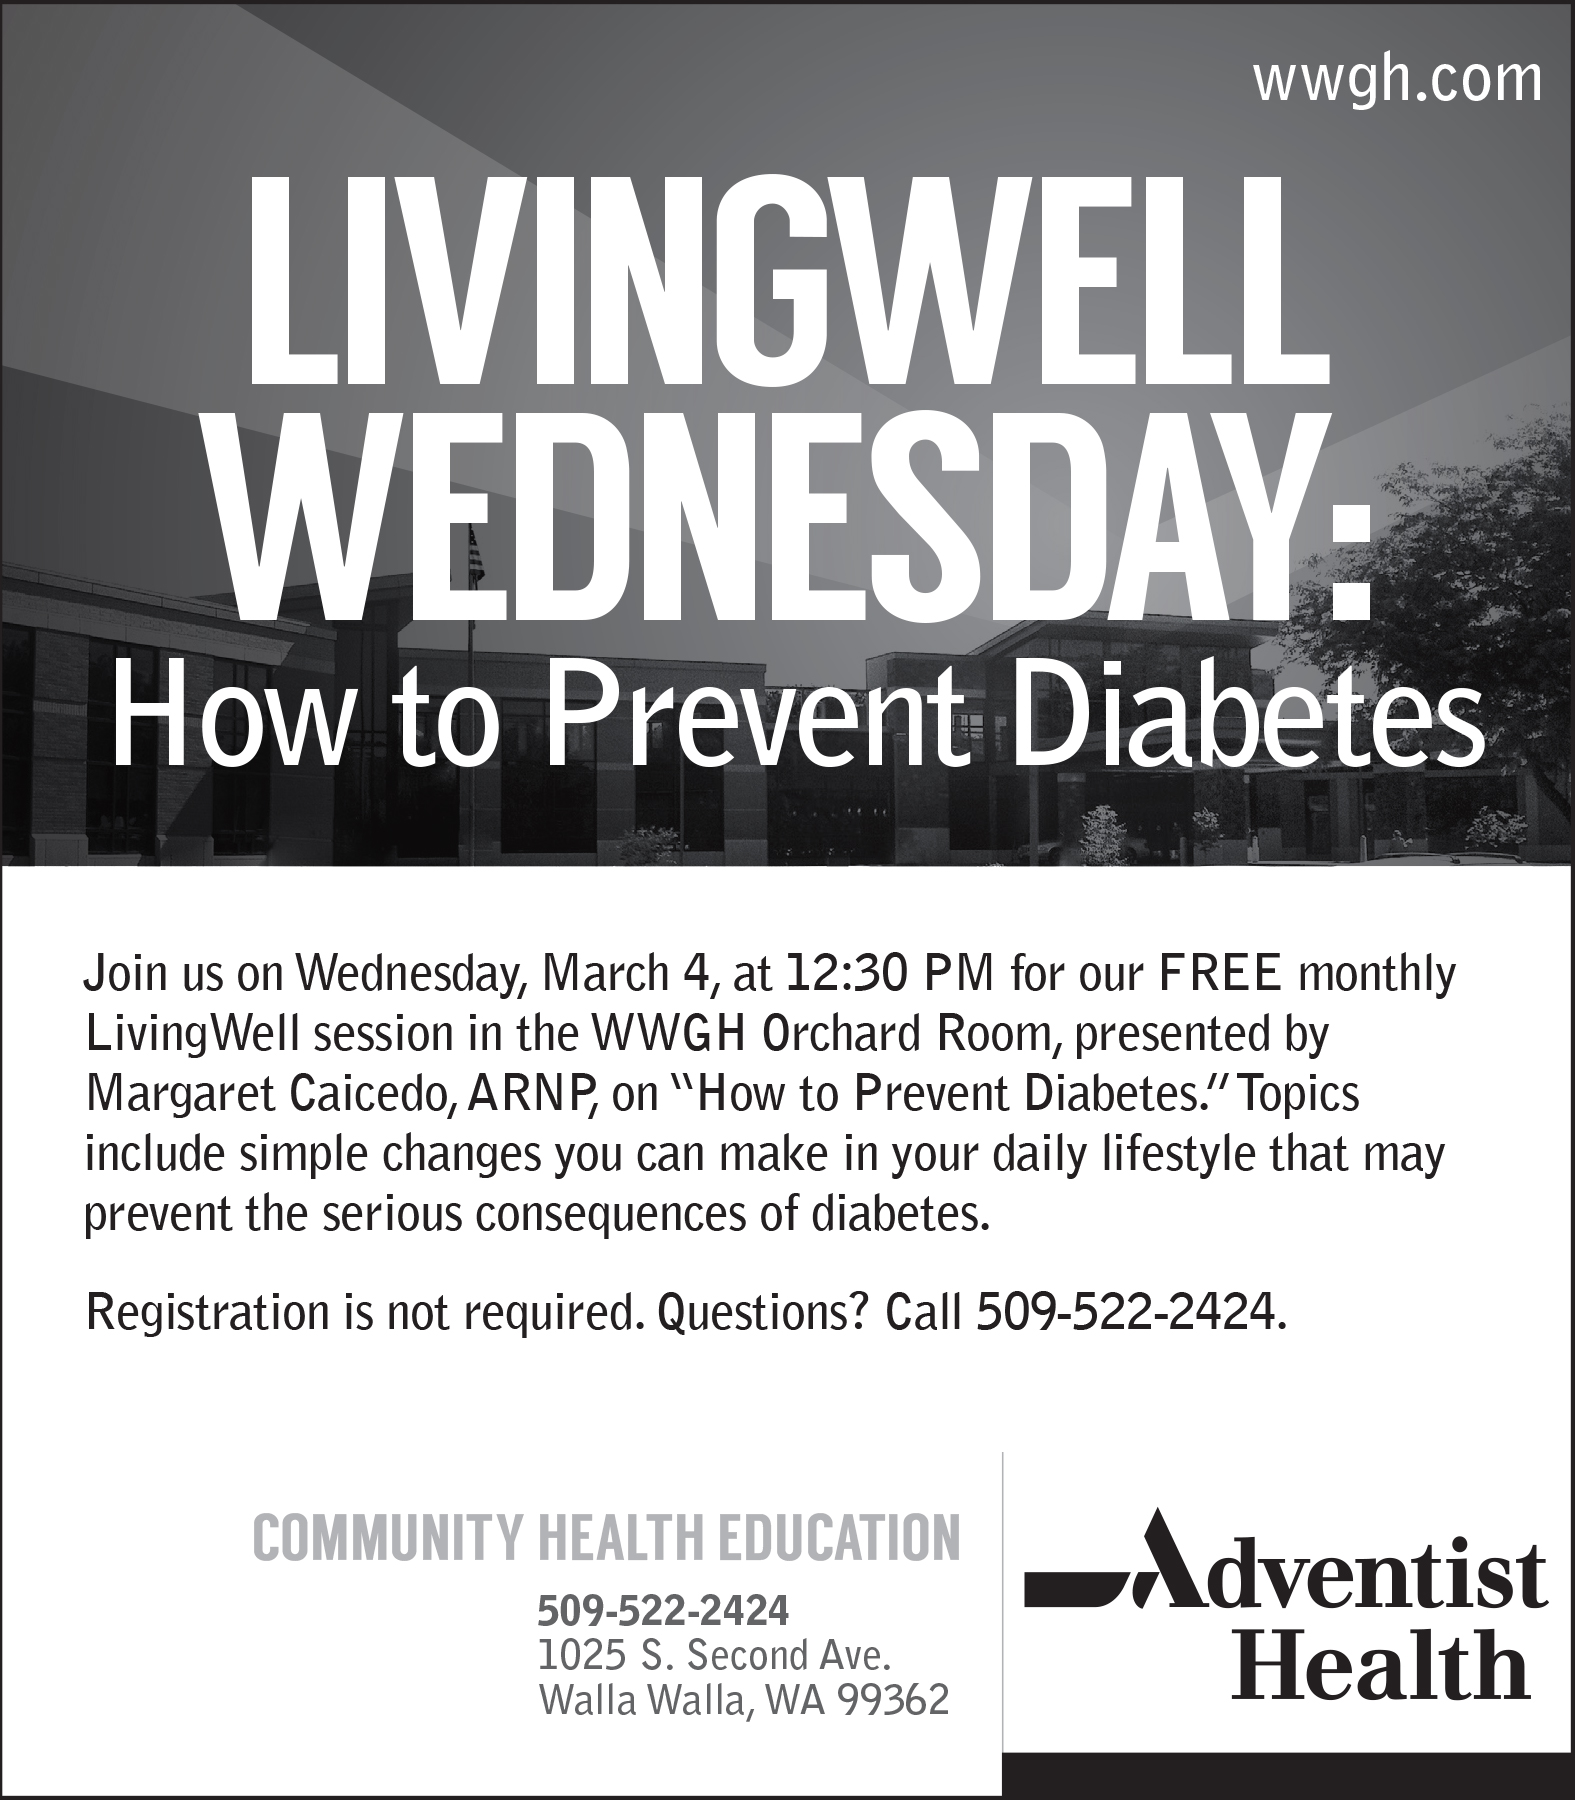 CHE---How-to-Prevent-Diabetes,-March-LivingWell-Wednesday.jpg